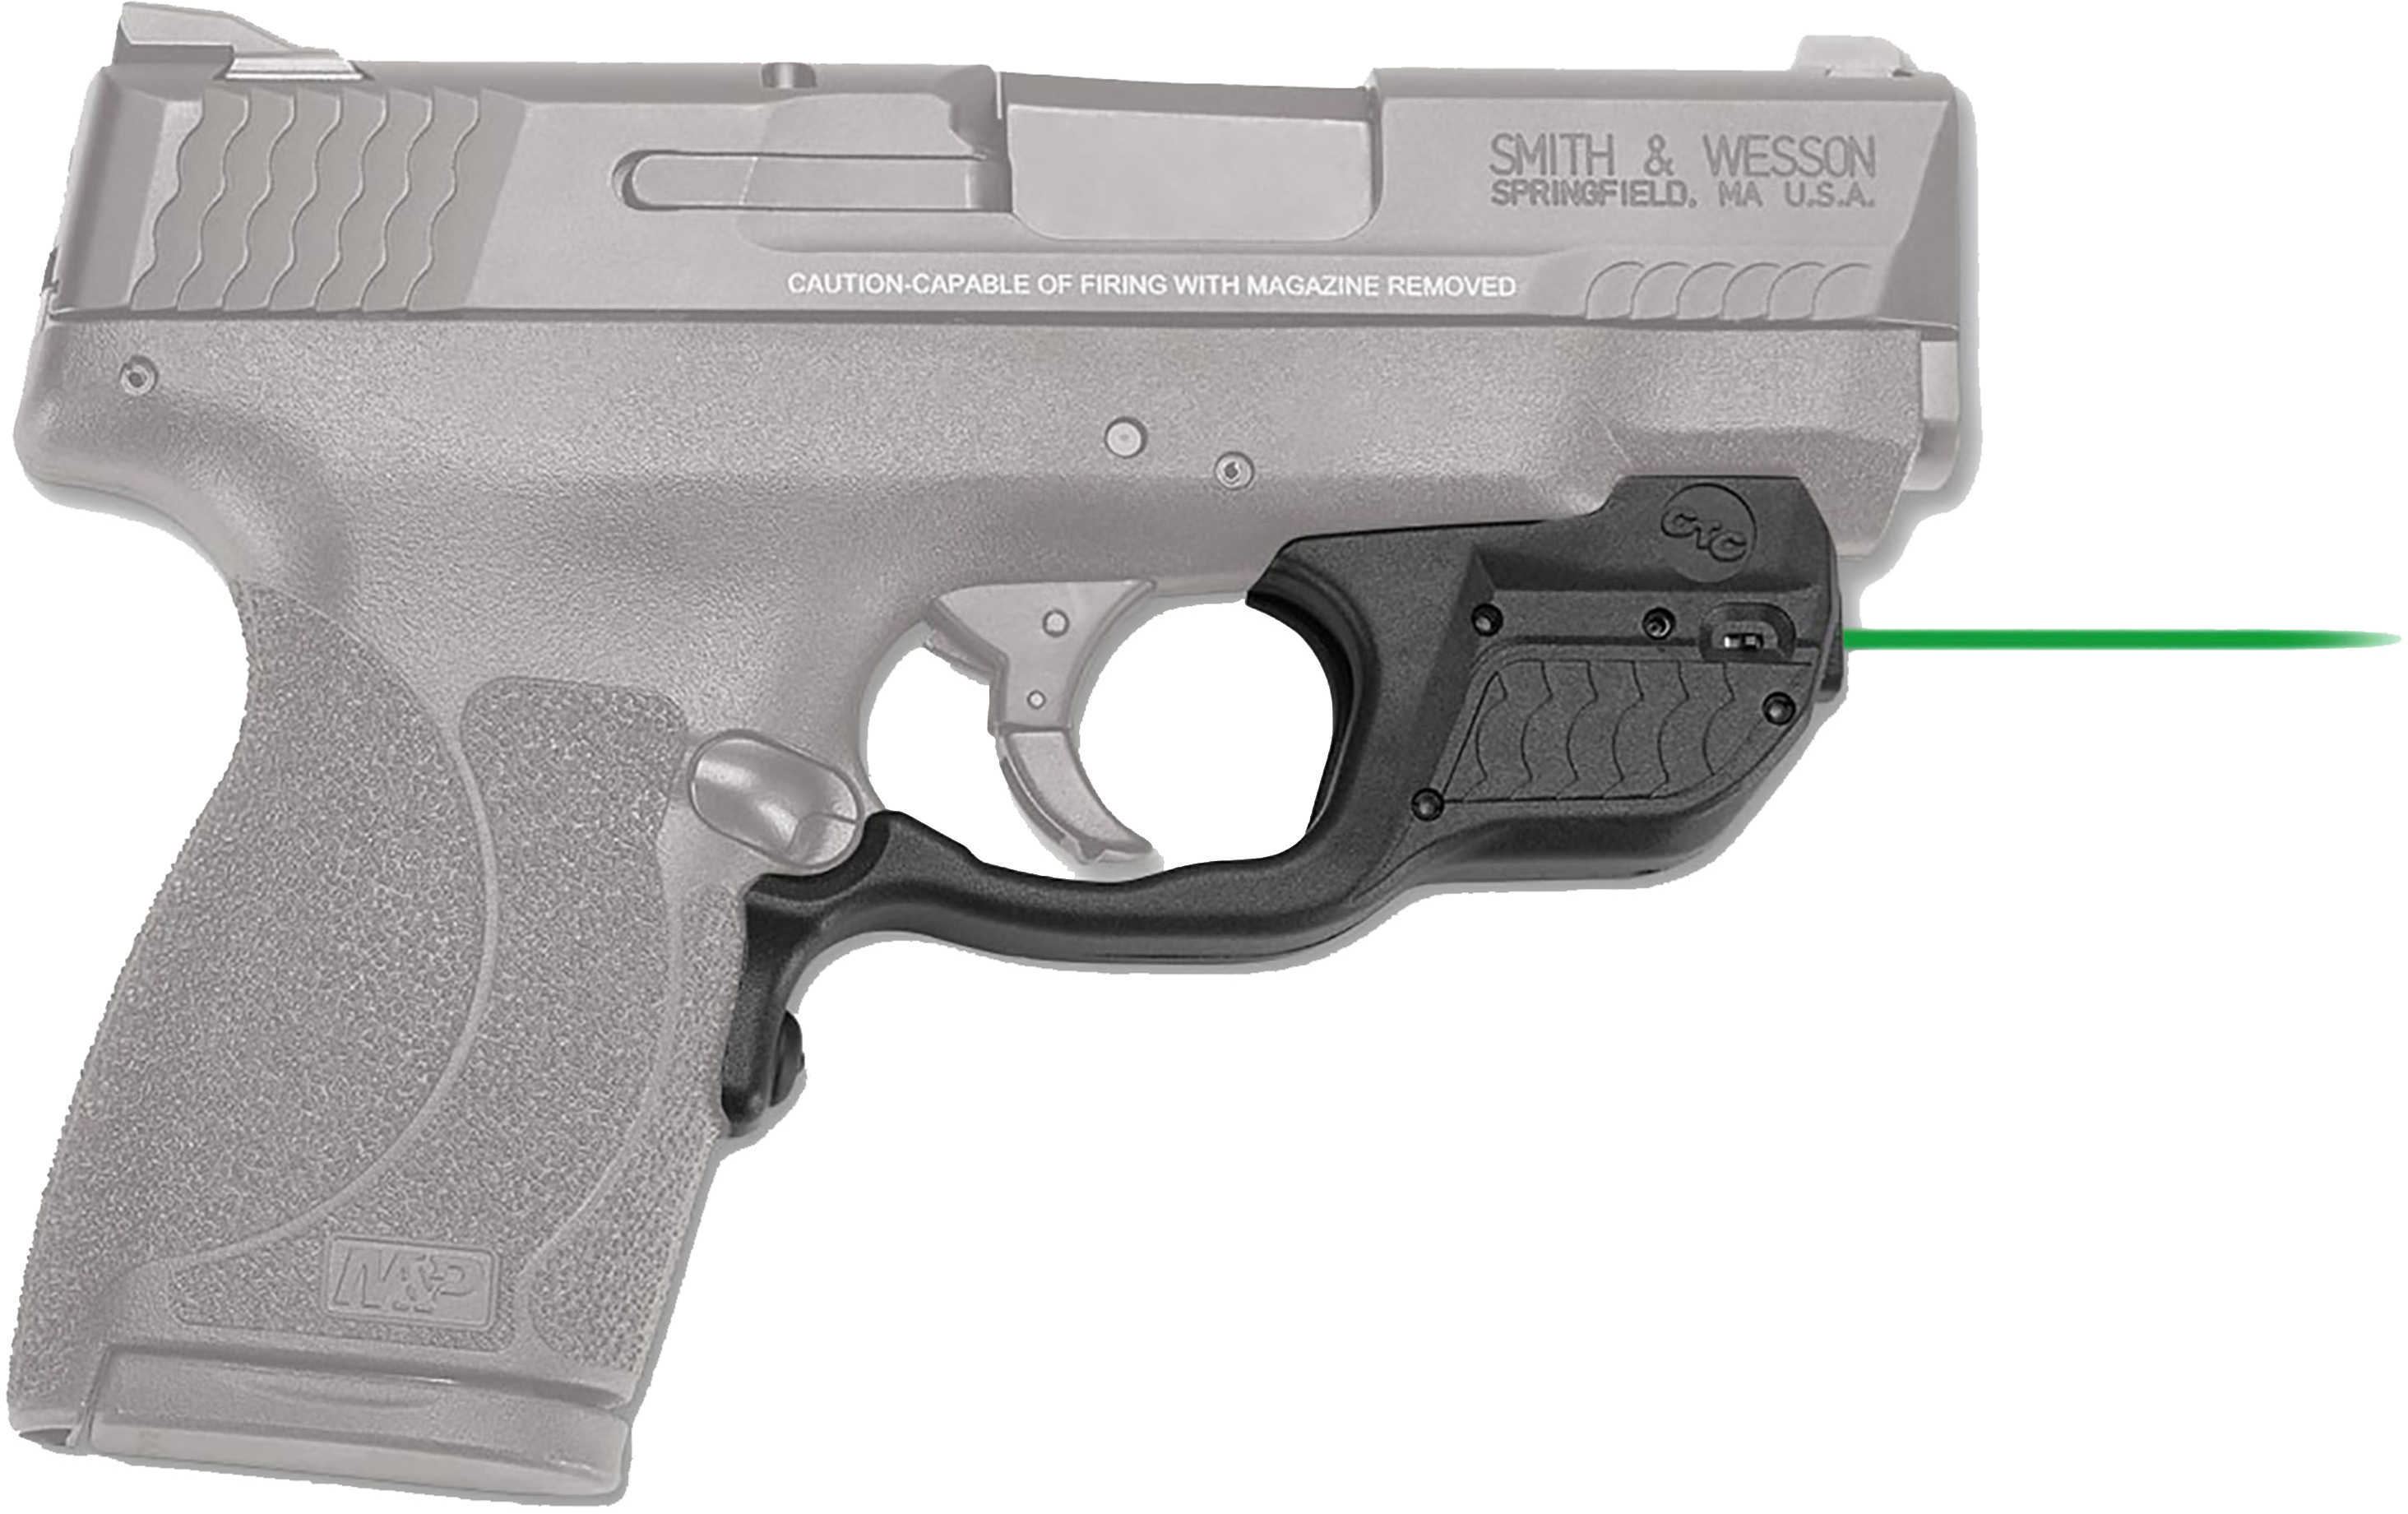 Crimson Trace Laserguard S&W Shield 45 Green Front Activation | Lg-485G